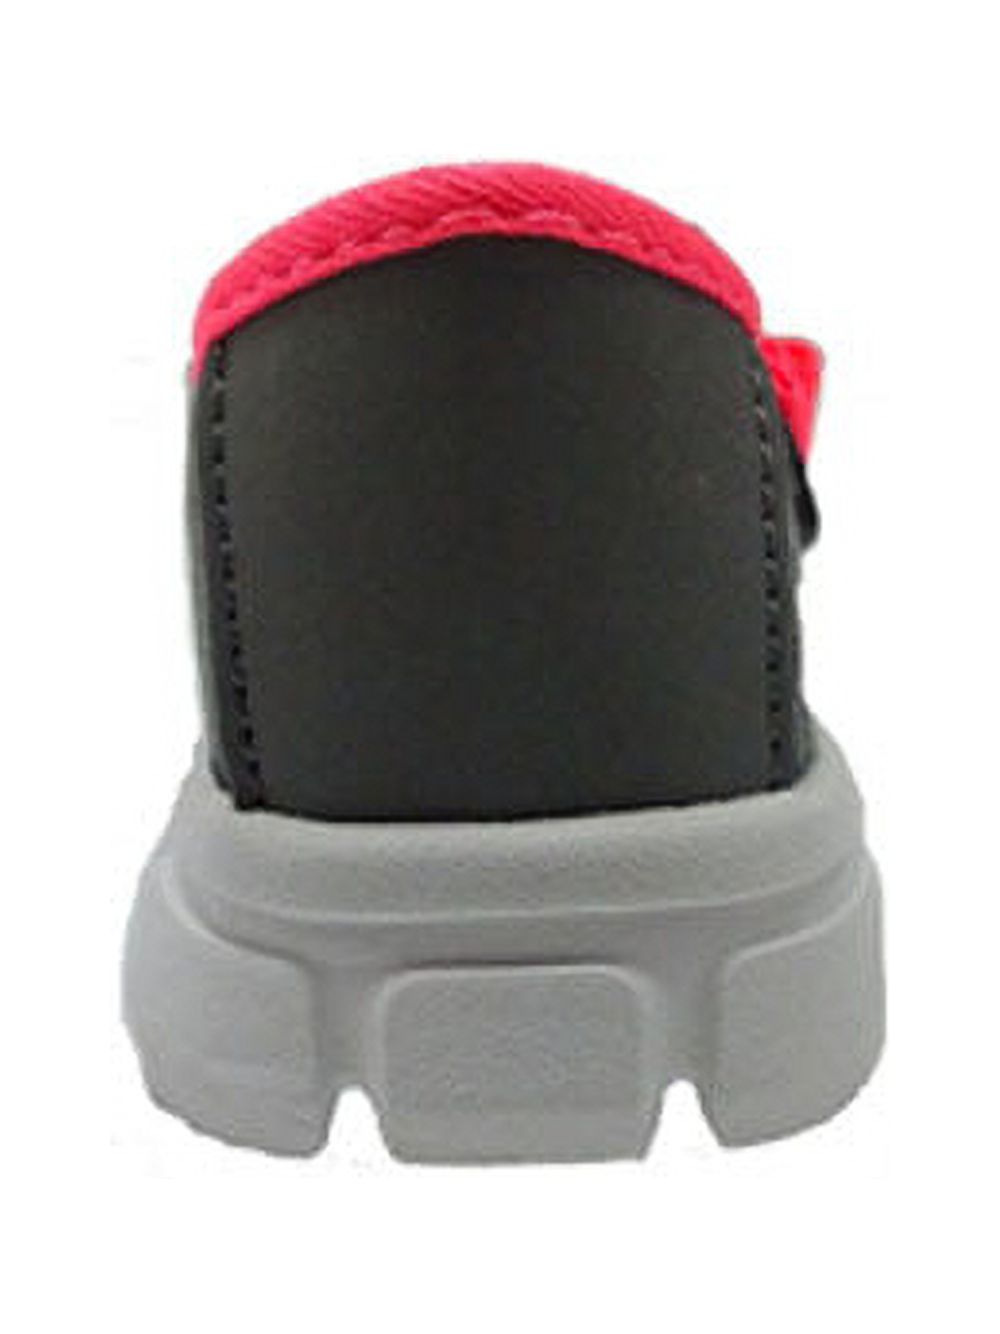 Athletic Works Toddler Girl's T-Strap Athletic Shoe - image 2 of 5